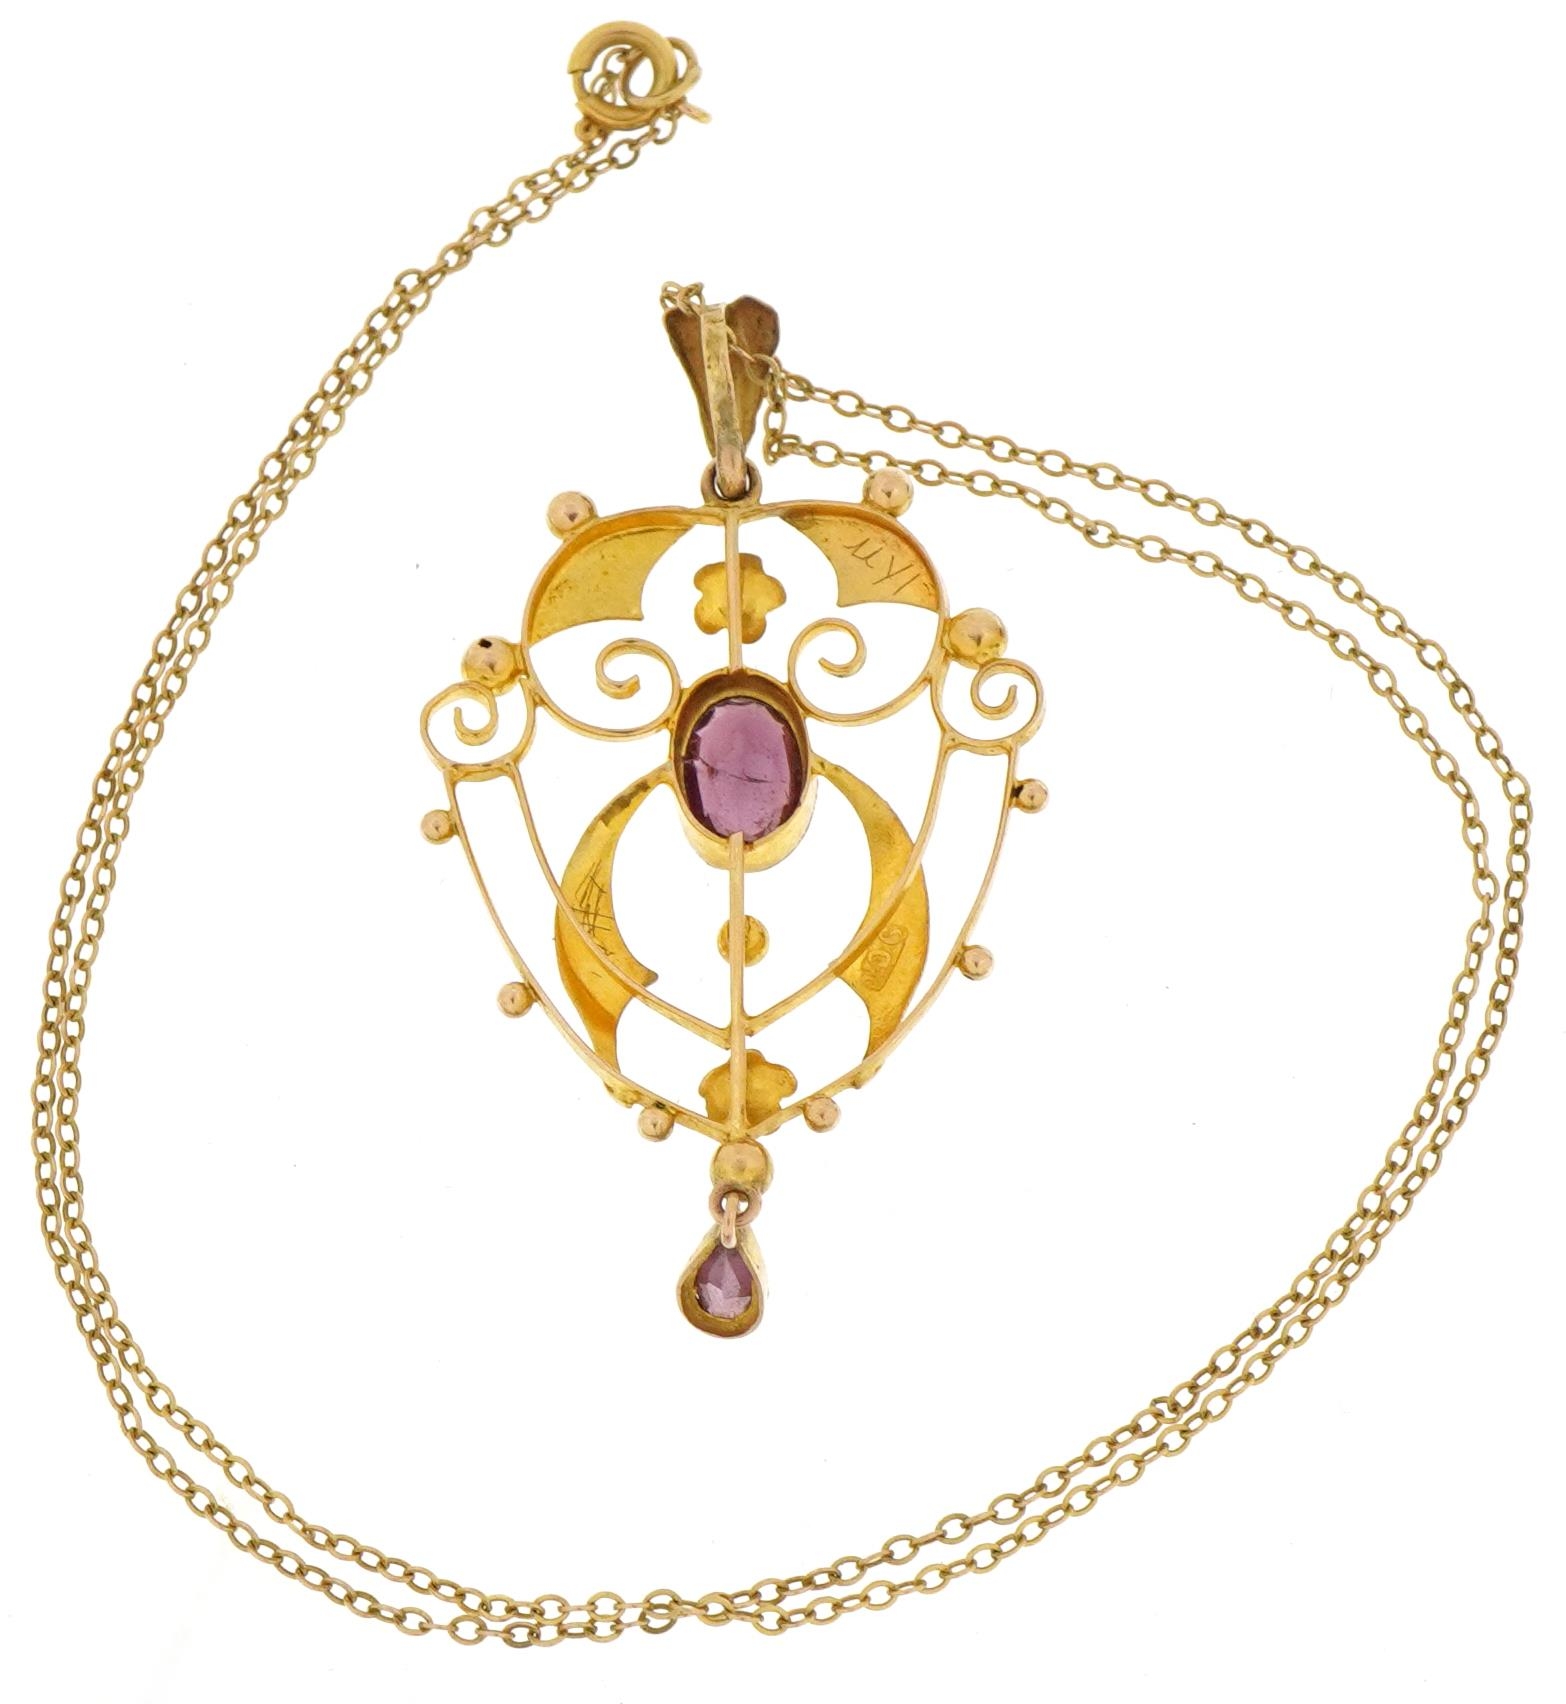 Edwardian 9ct gold openwork pendant set with two amethysts on a 9ct gold Belcher link necklace, 5. - Image 3 of 4